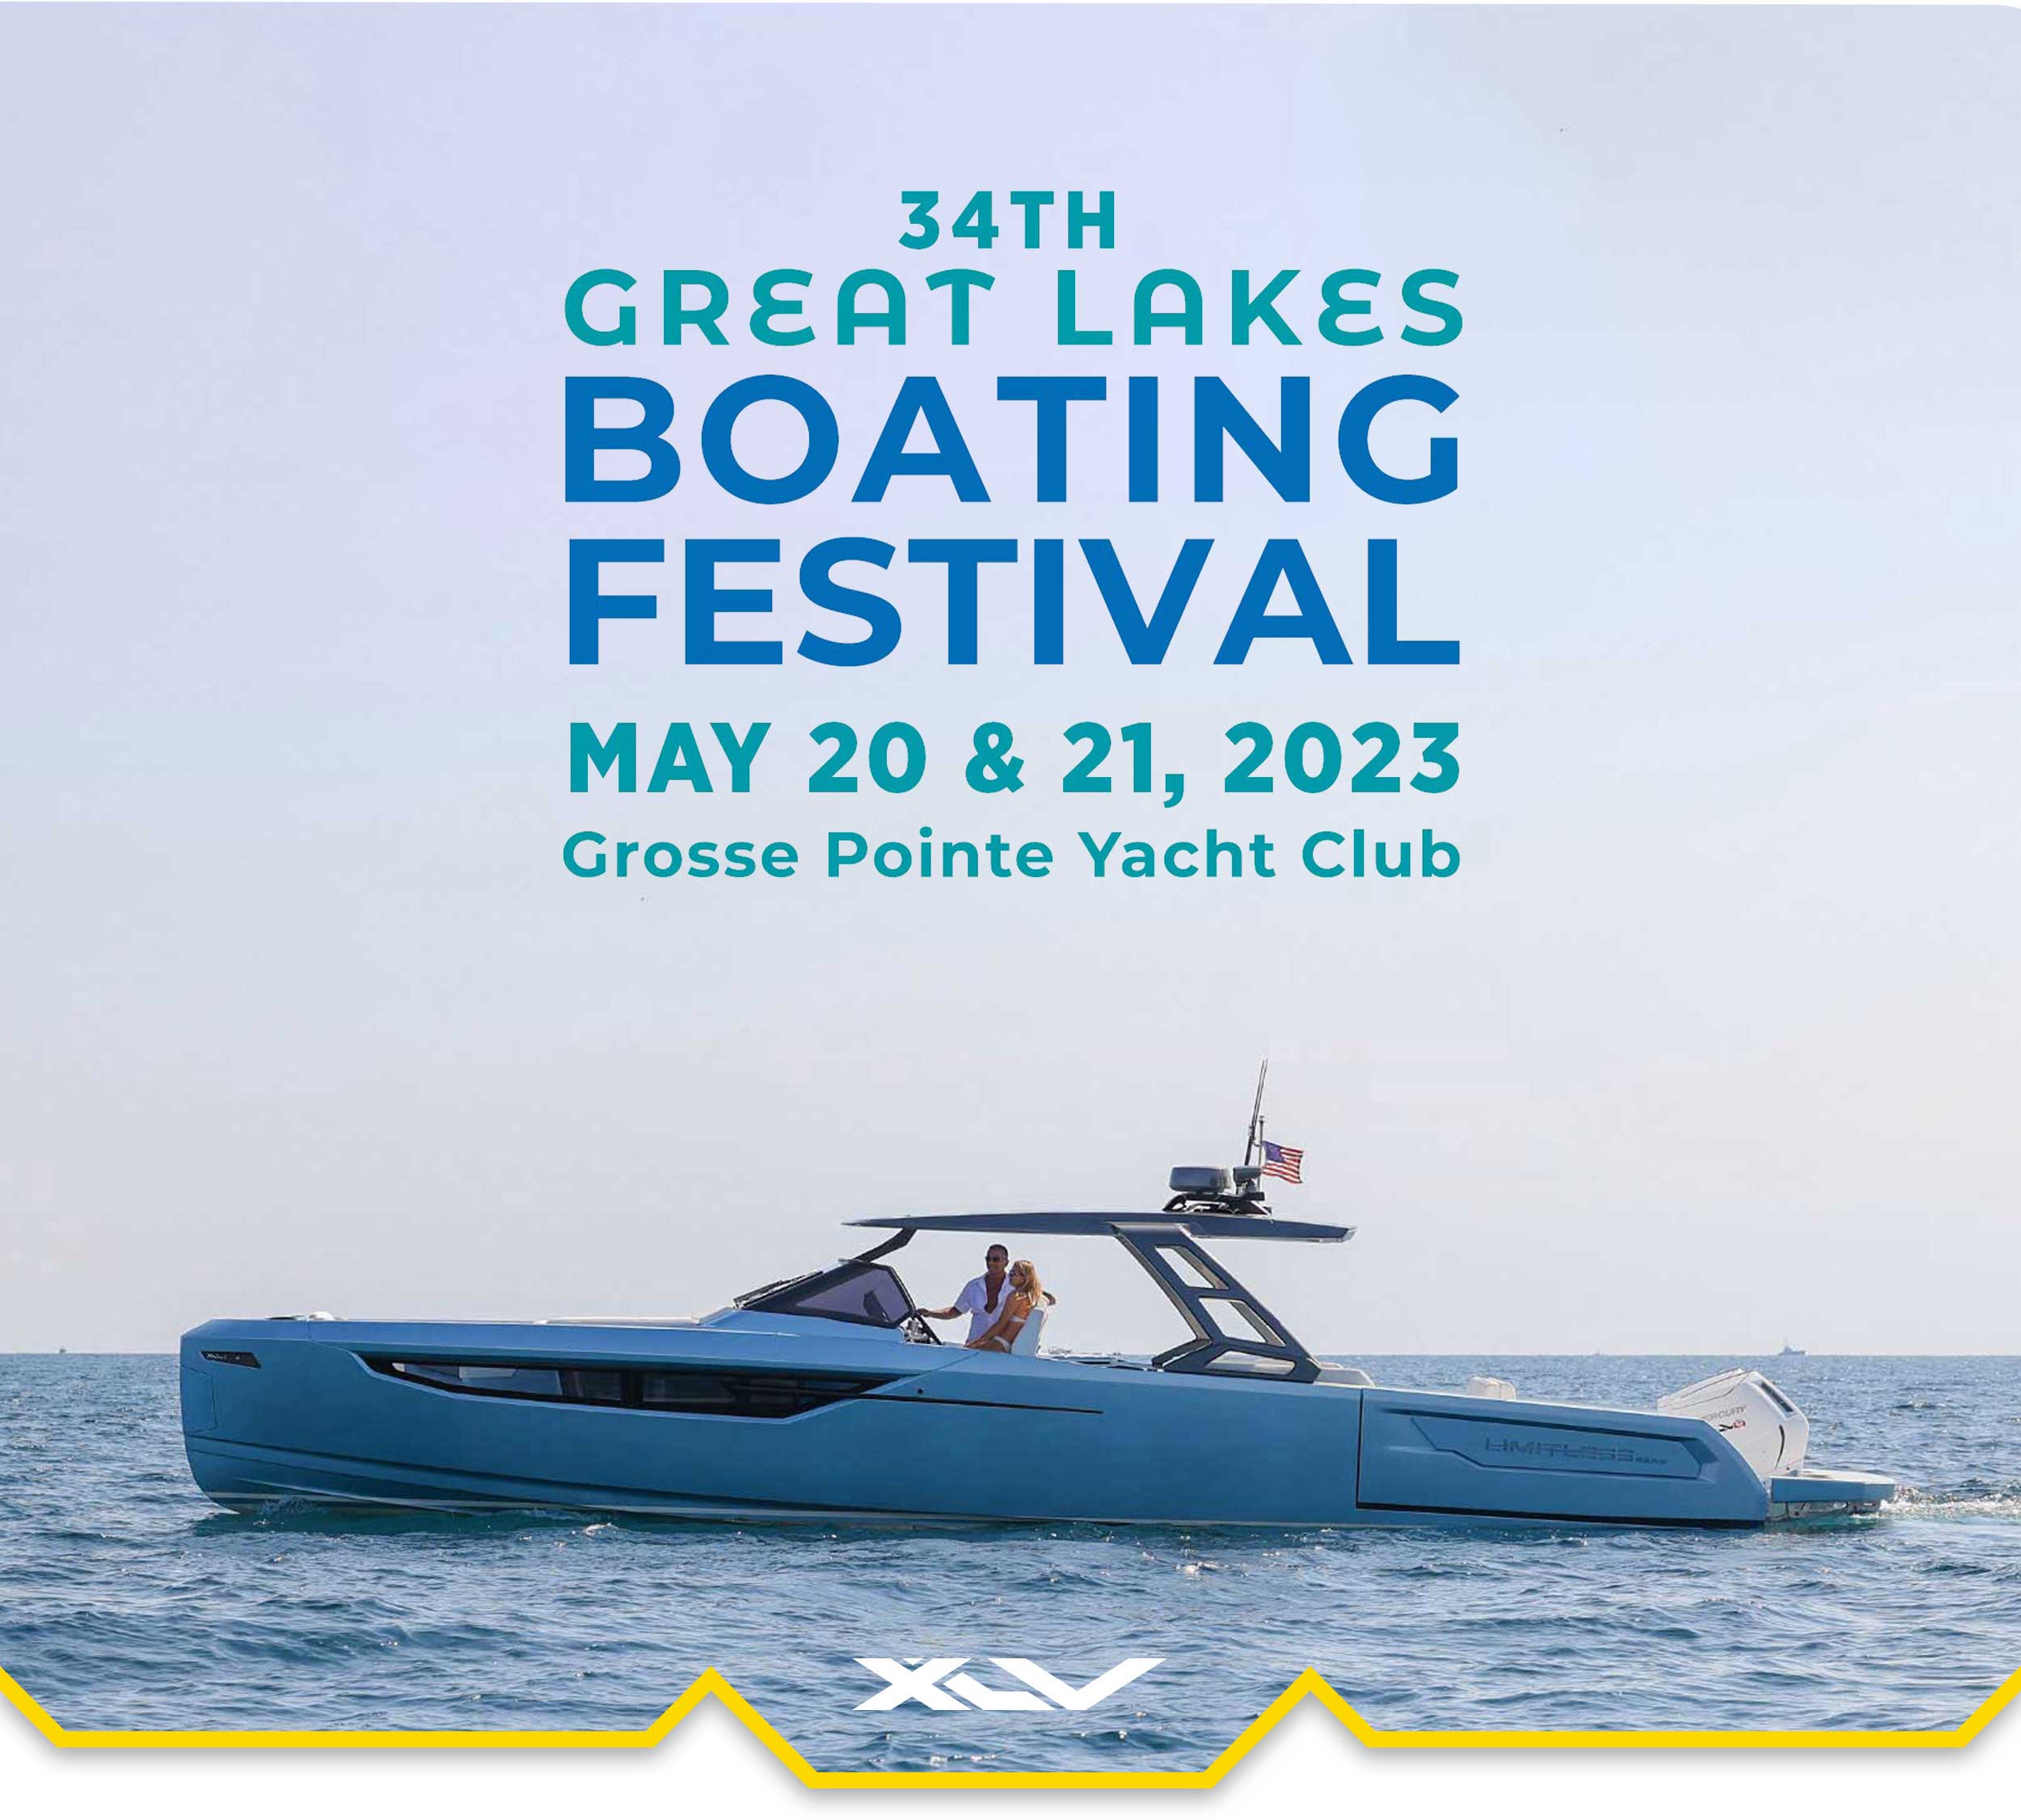 Great_Lakes_Boating_Festival_Limitless_Seas_Michigan_Premiere